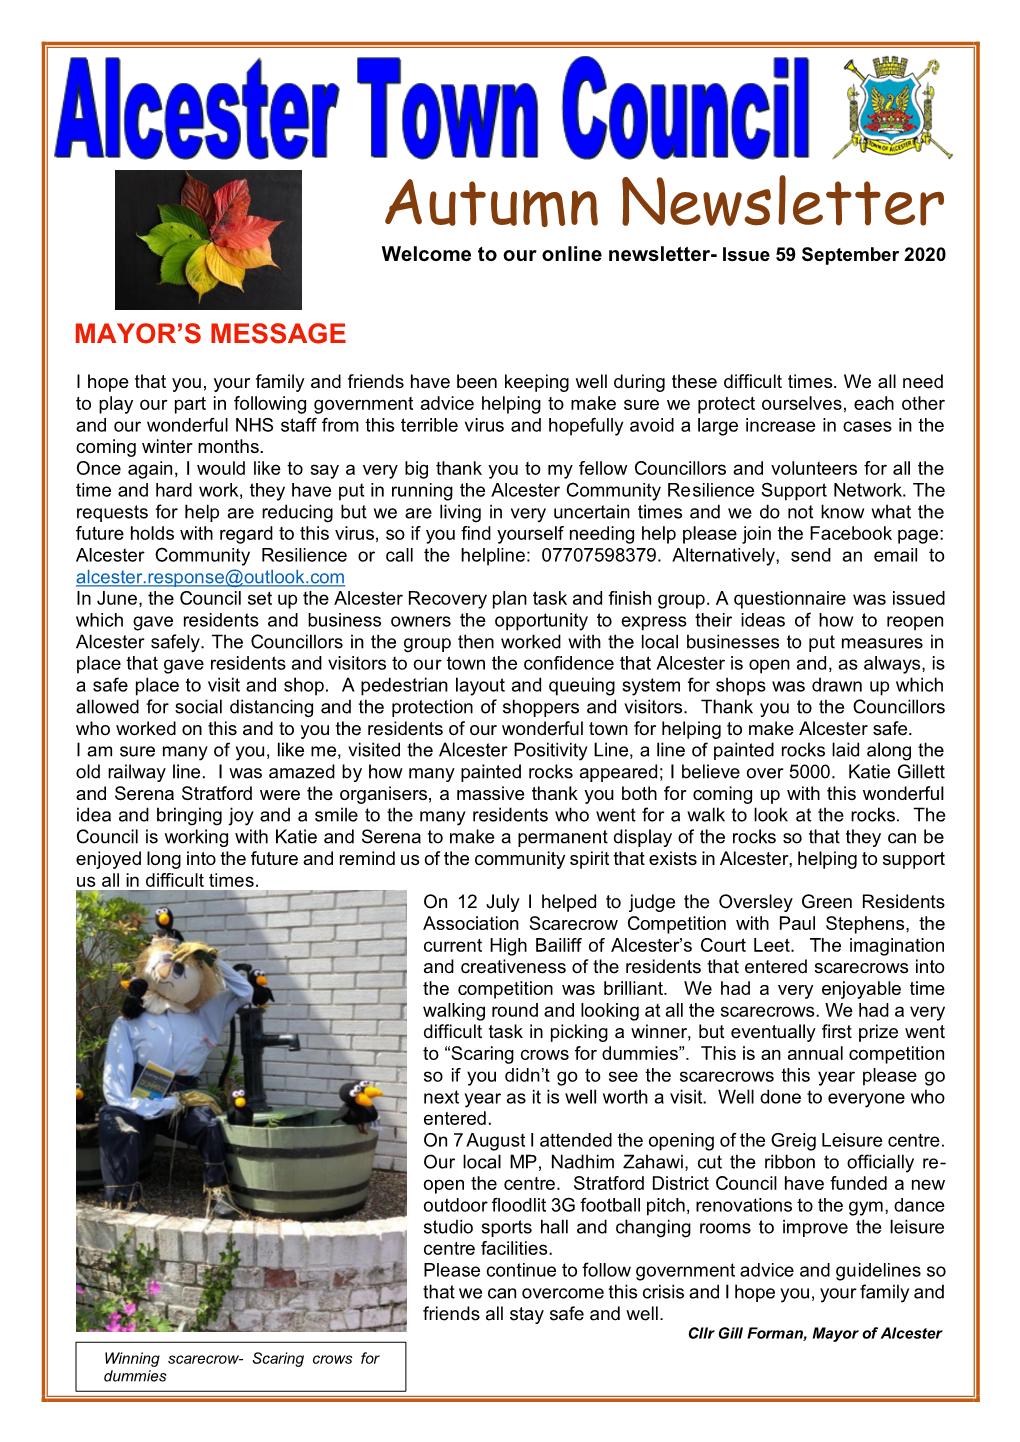 Autumn Newsletter Welcome to Our Online Newsletter- Issue 59 September 2020